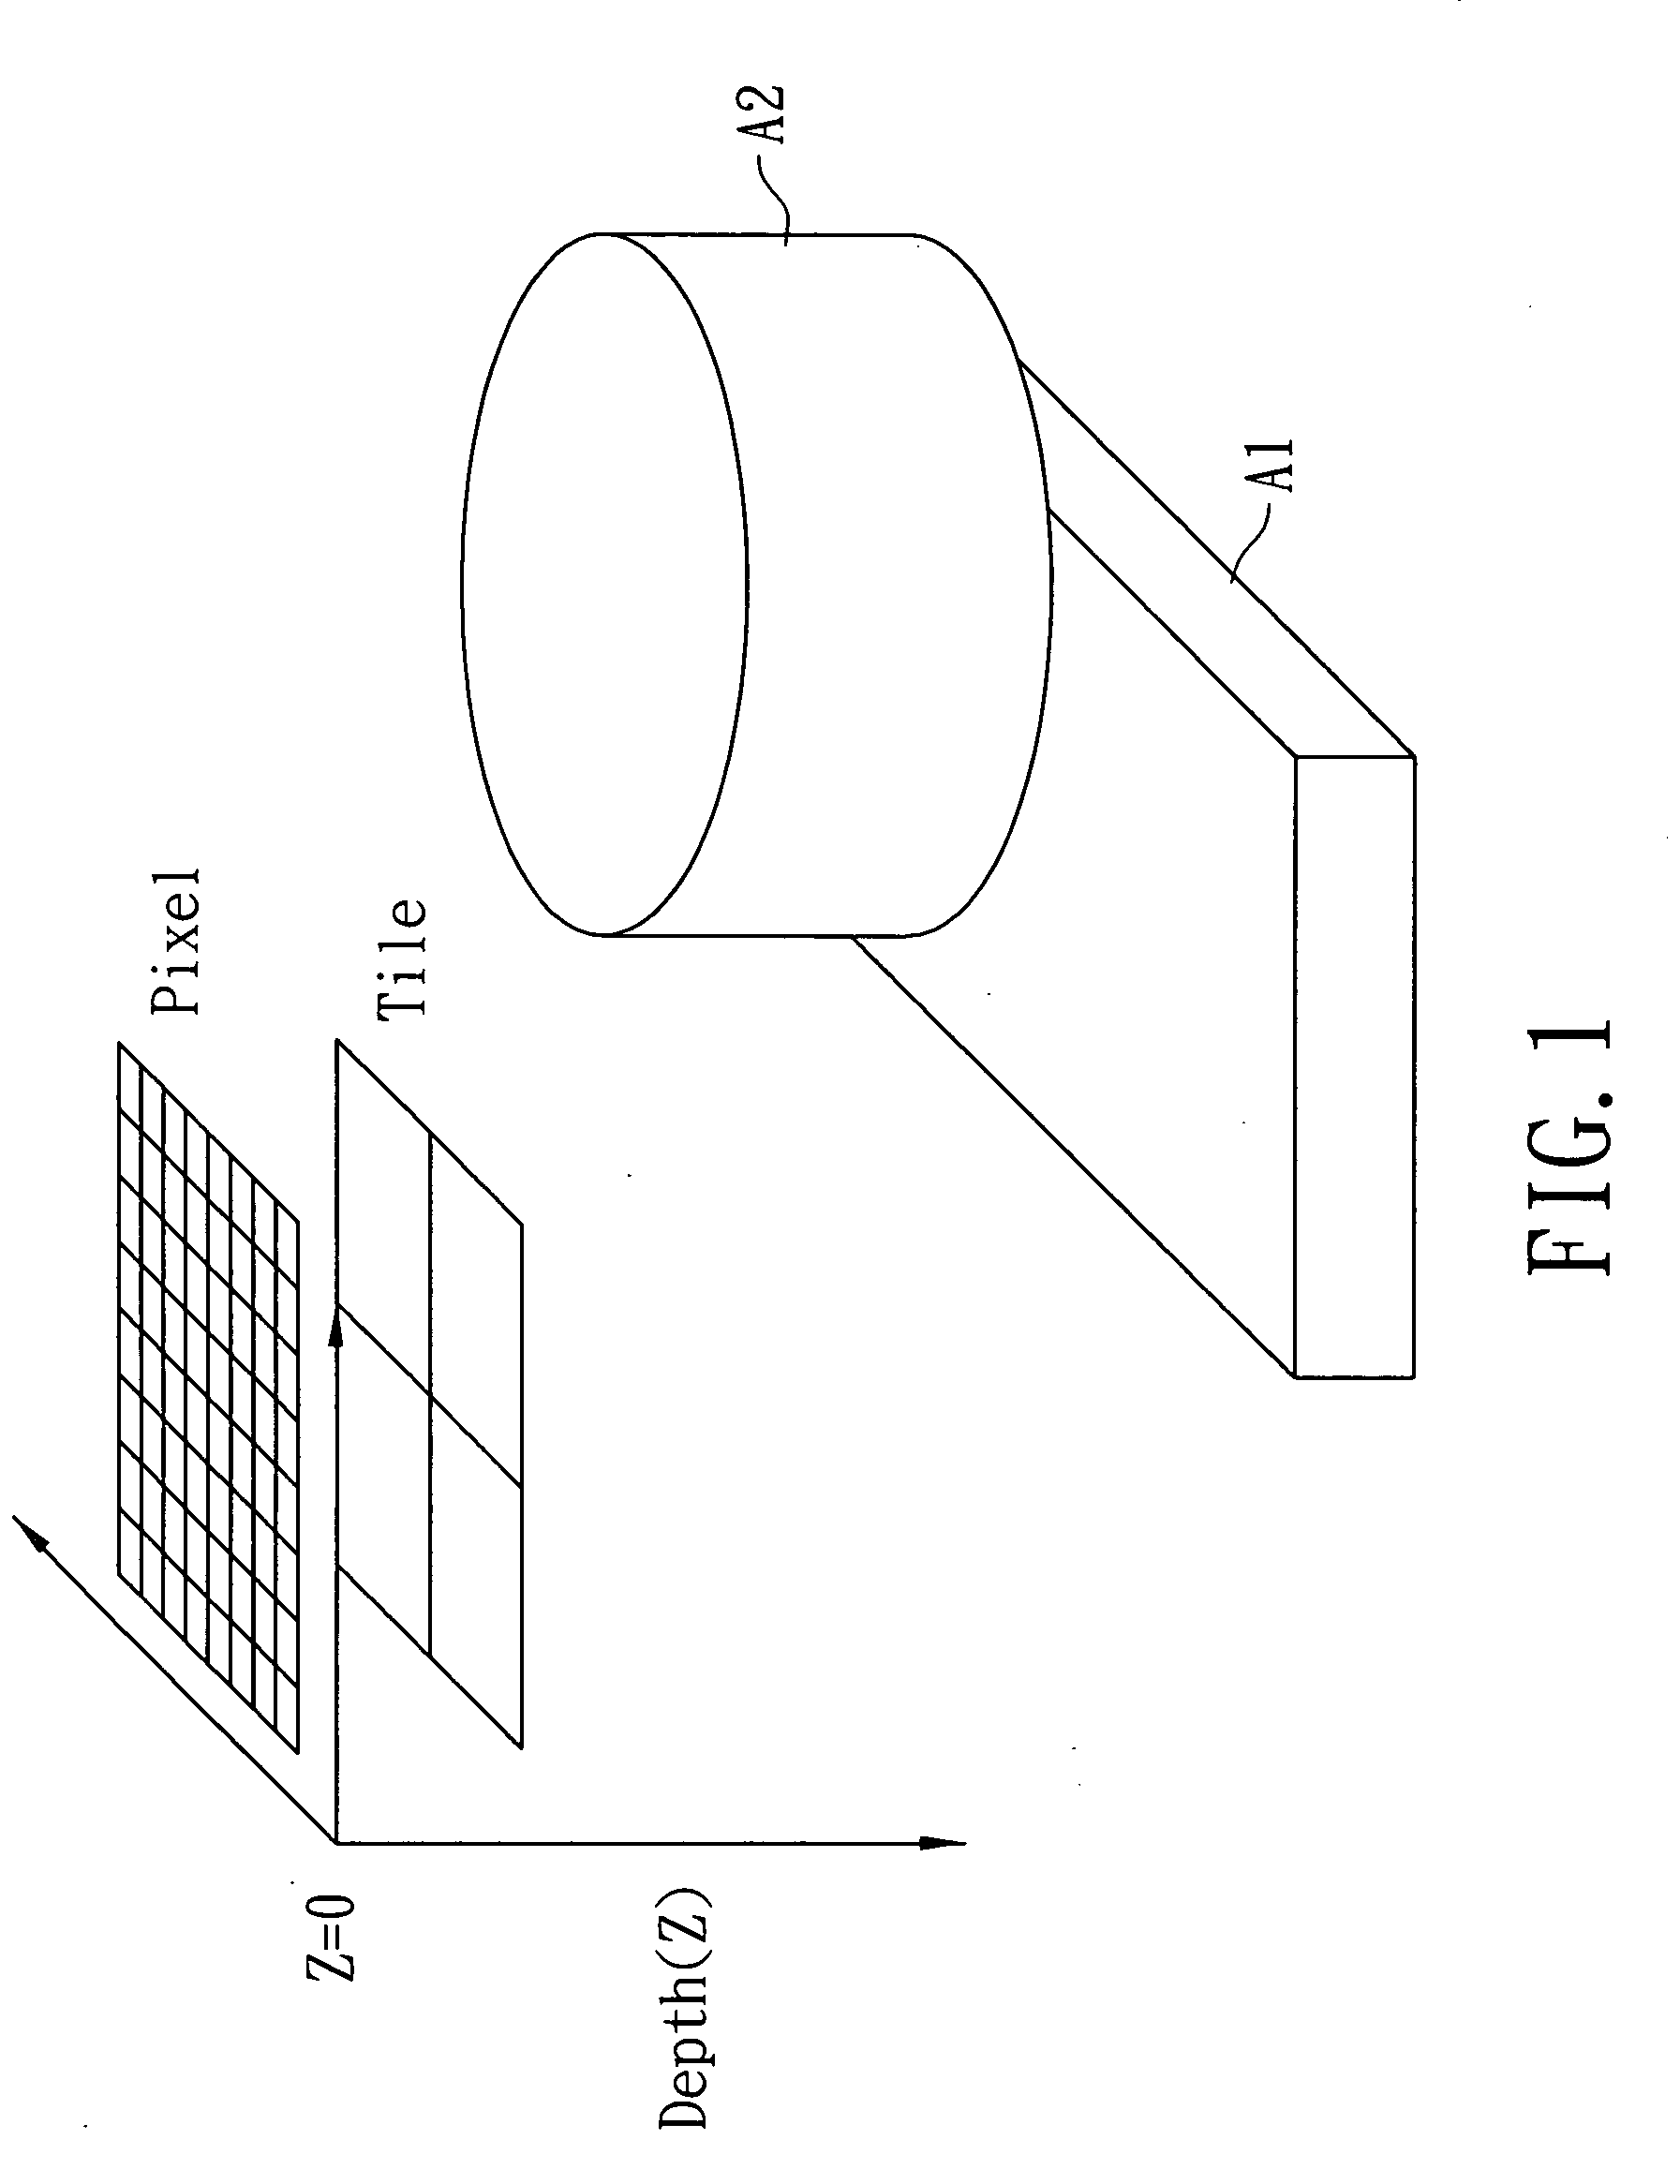 System and method for adaptive tile depth filter